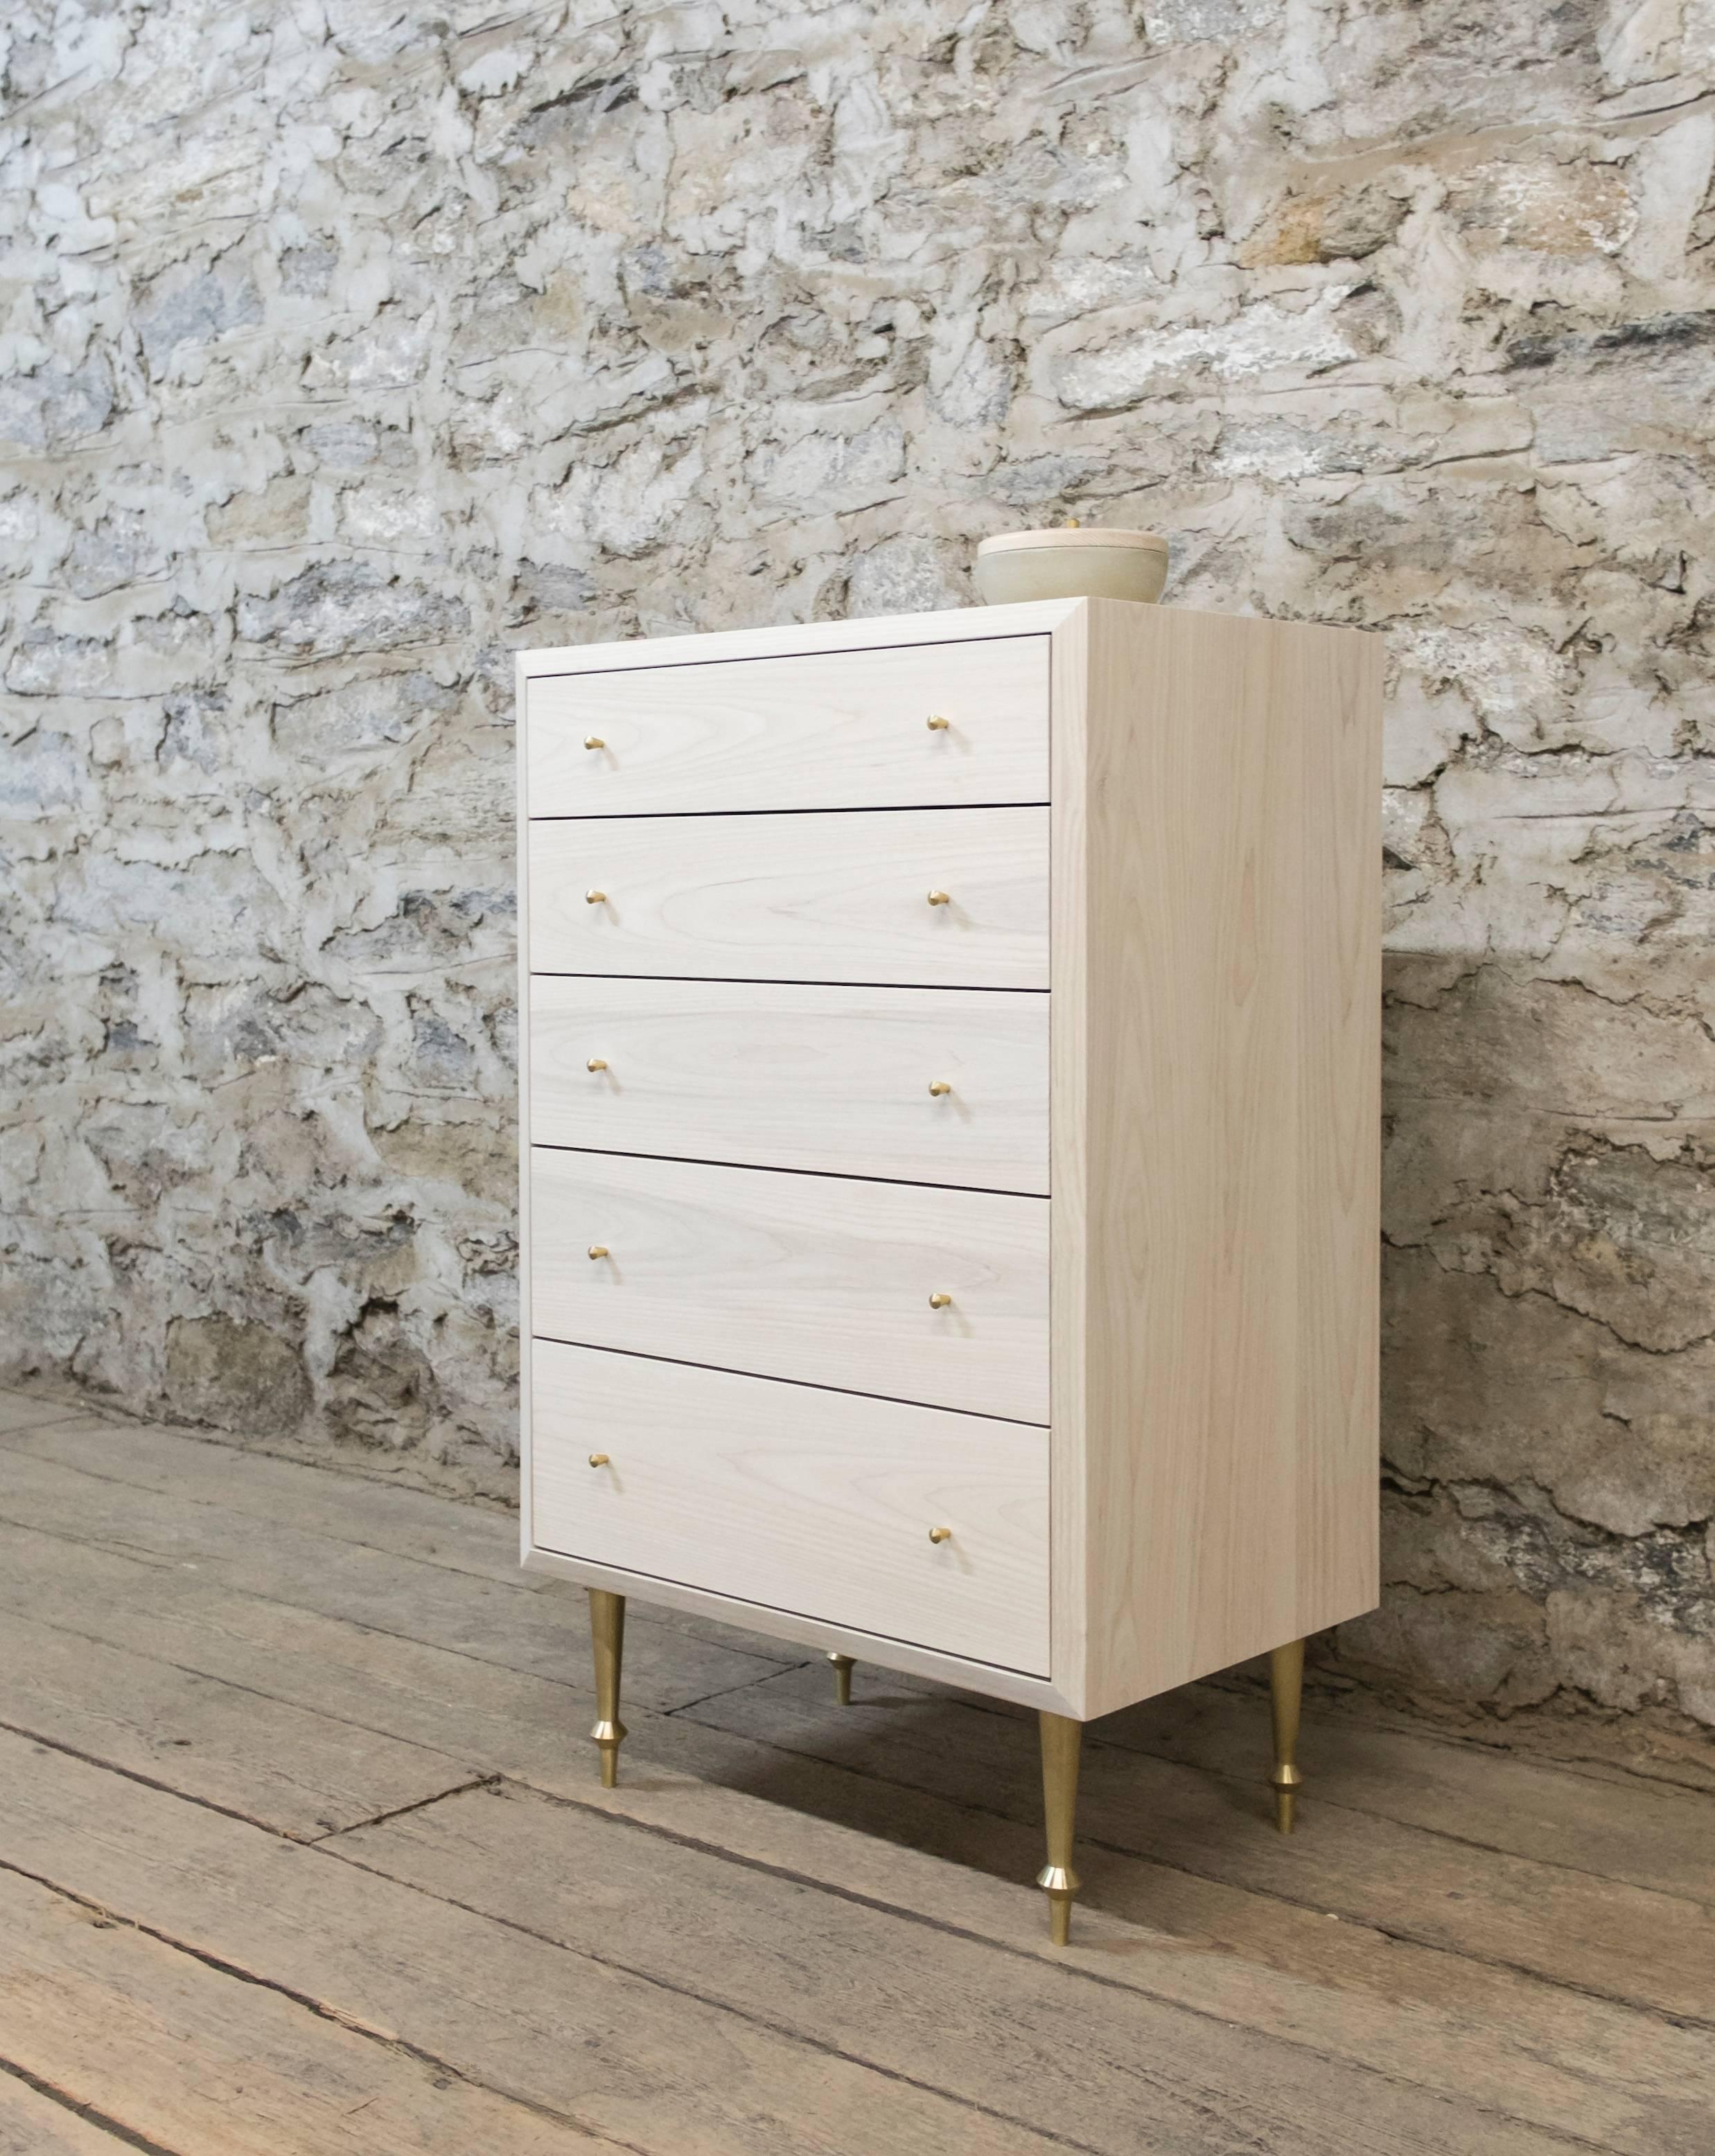 Solid bleached ash with turned brass legs and drawer pulls.
Fabric drawer linings upon request for an additional fee.
Flat waterborne finish.
Dimensions: 42” H x 26” W x 18” D.
Custom sizing and configurations available.
Offered in a variety of